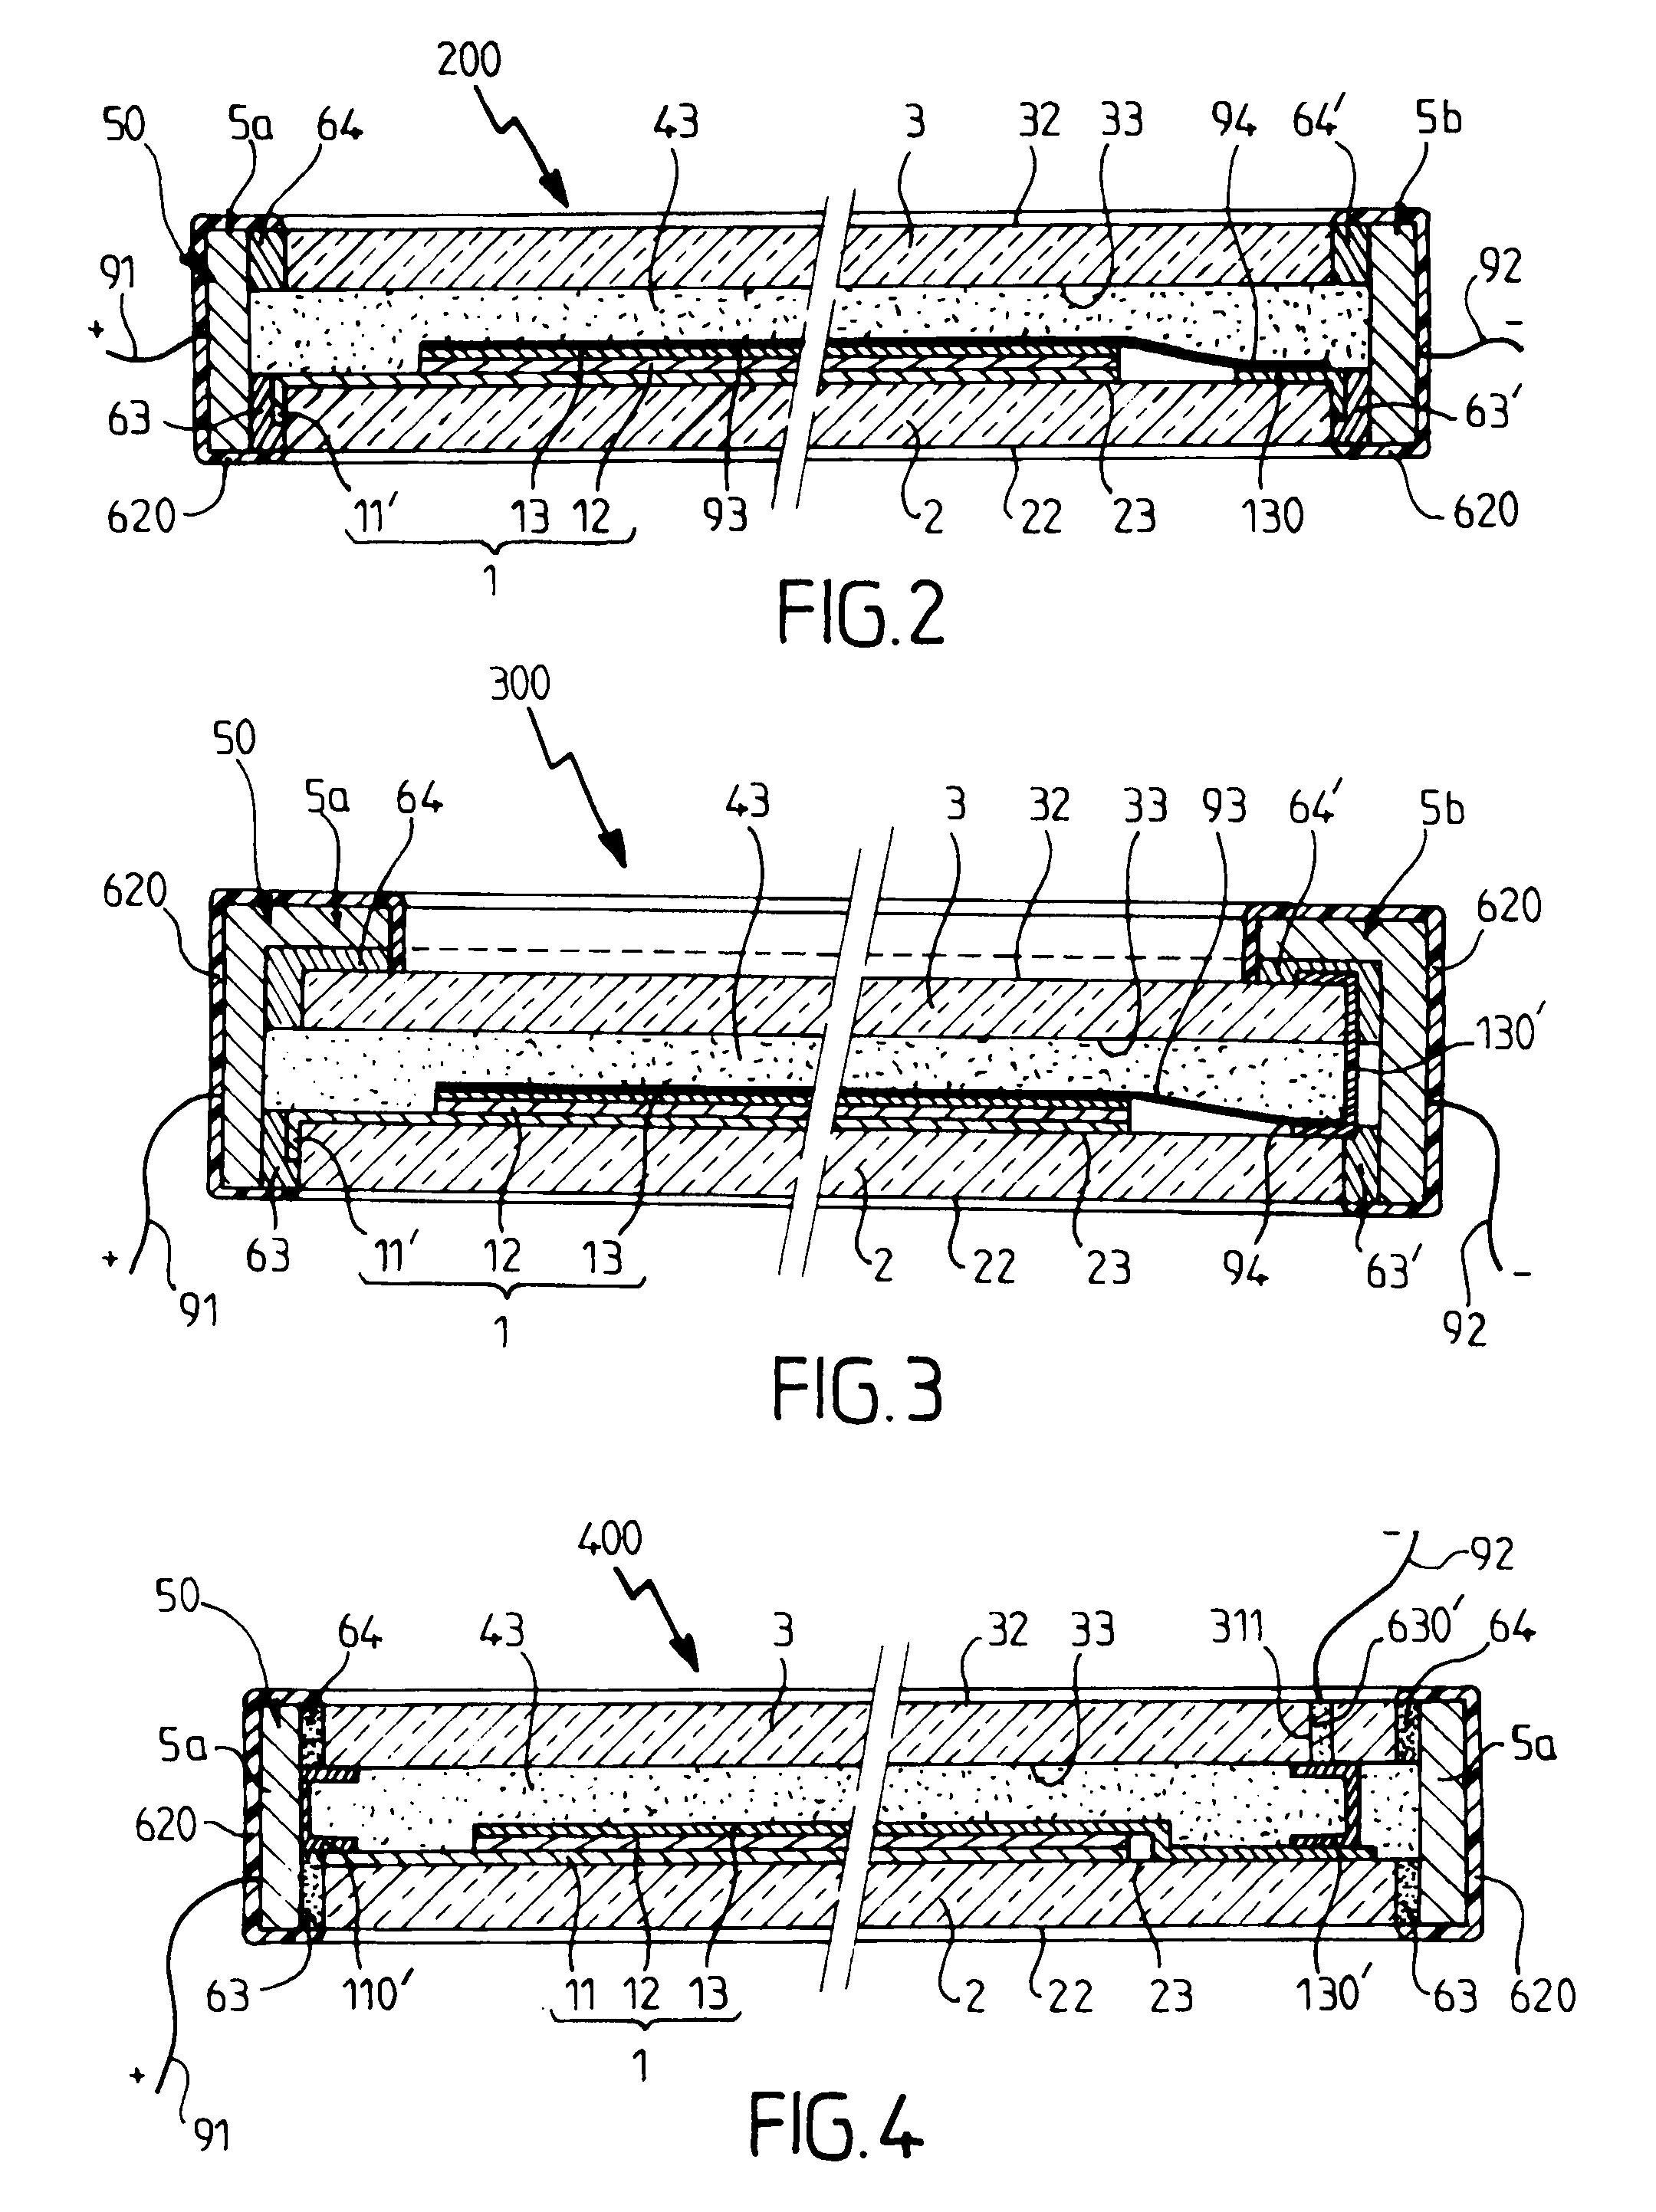 Active device having variable energy/optical properties